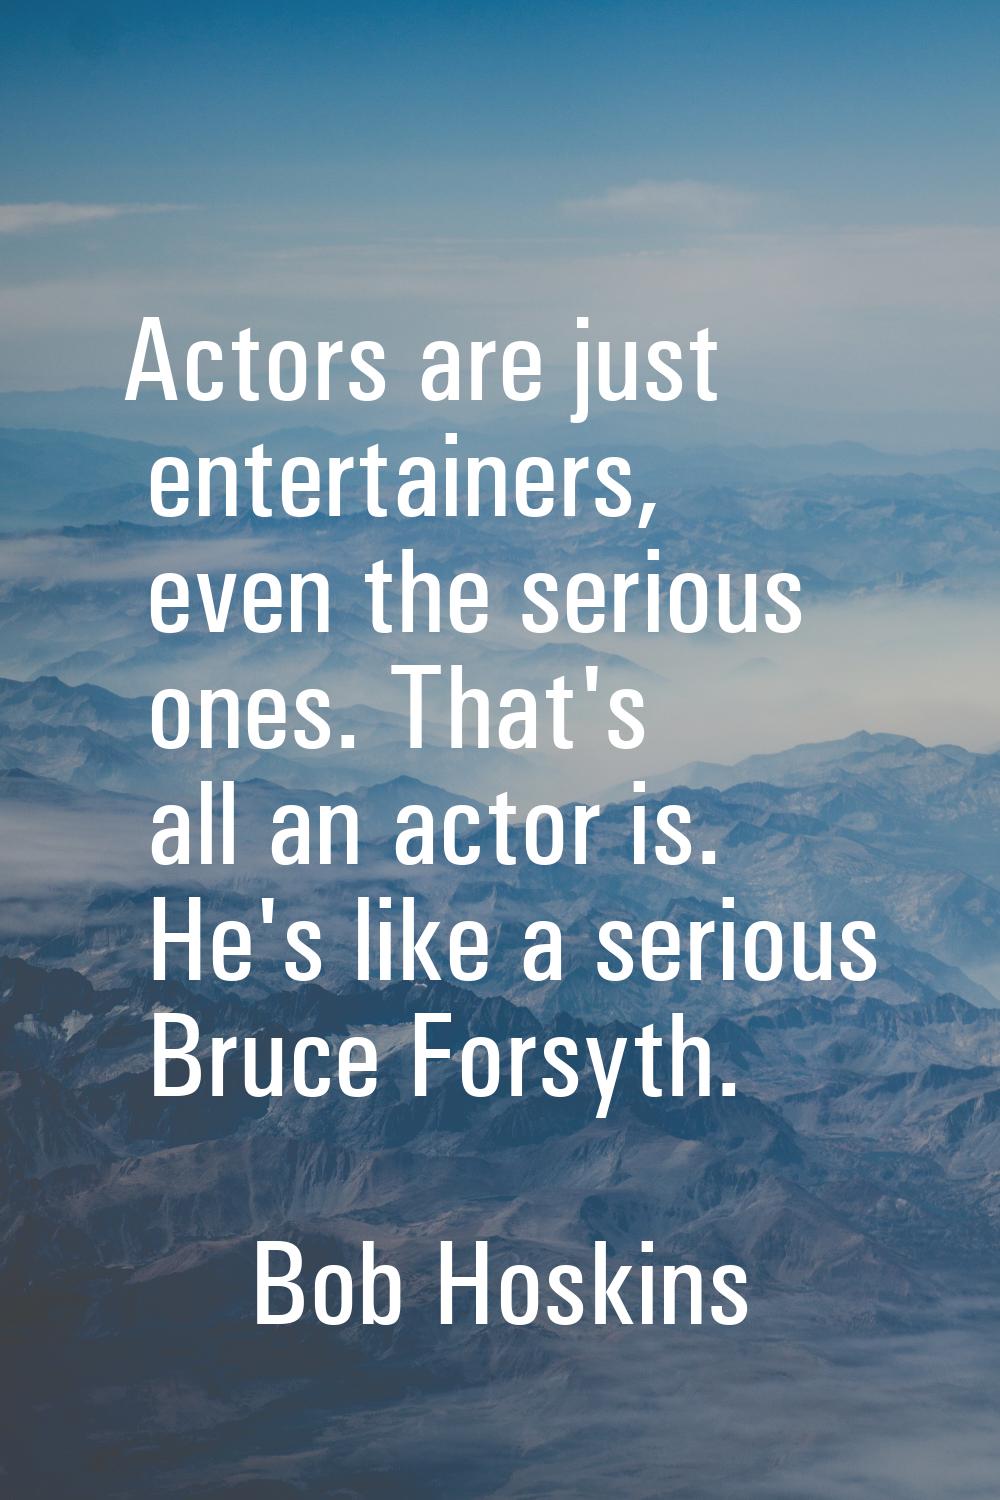 Actors are just entertainers, even the serious ones. That's all an actor is. He's like a serious Br